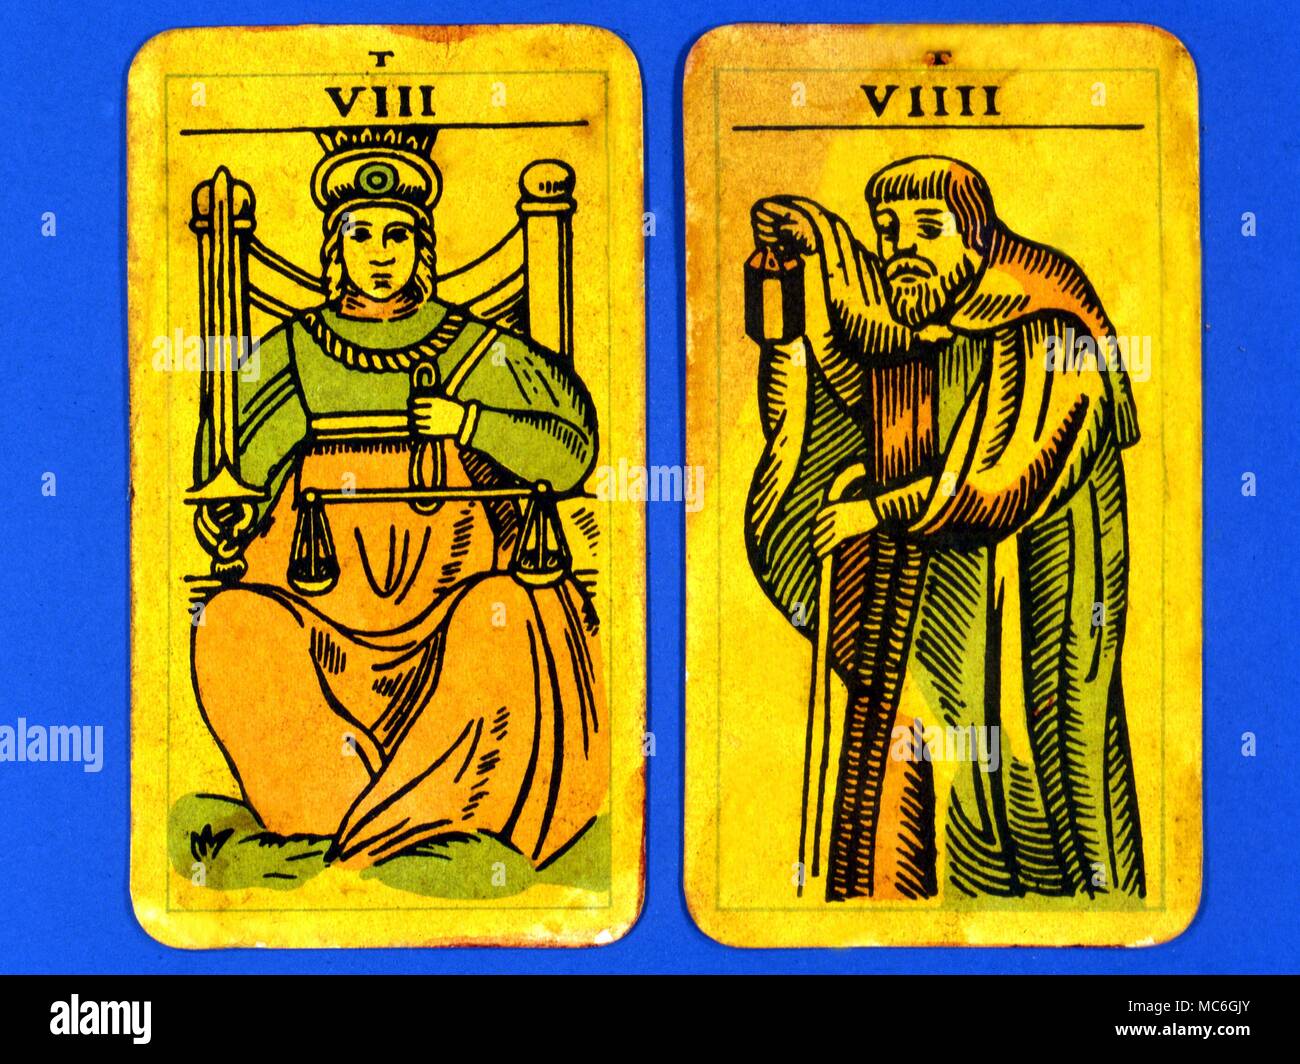 Tarot Cards-Majo Arcana- The Parisian Tarot. Card 8.The Justice, and Card 9.. The Hermit. Two cards from a Major Arcana picture Tarot,adapted by a Wiccan group. Probably designed in an archaizing style in loose imitation of the Rosicrucian deck designed by Pamela Coleman Smith, alongside A.E.Waite, and various earlier decks, such as that published by Encausse (Papus) in The Tarot of the Bohemians at the end of the 19th century, post 1905, but earlier than 1912. The name Parisian Tarot was given by the owner of the deck - it might however be called the Tau Tarot, from the intriguing letter Tau Stock Photo